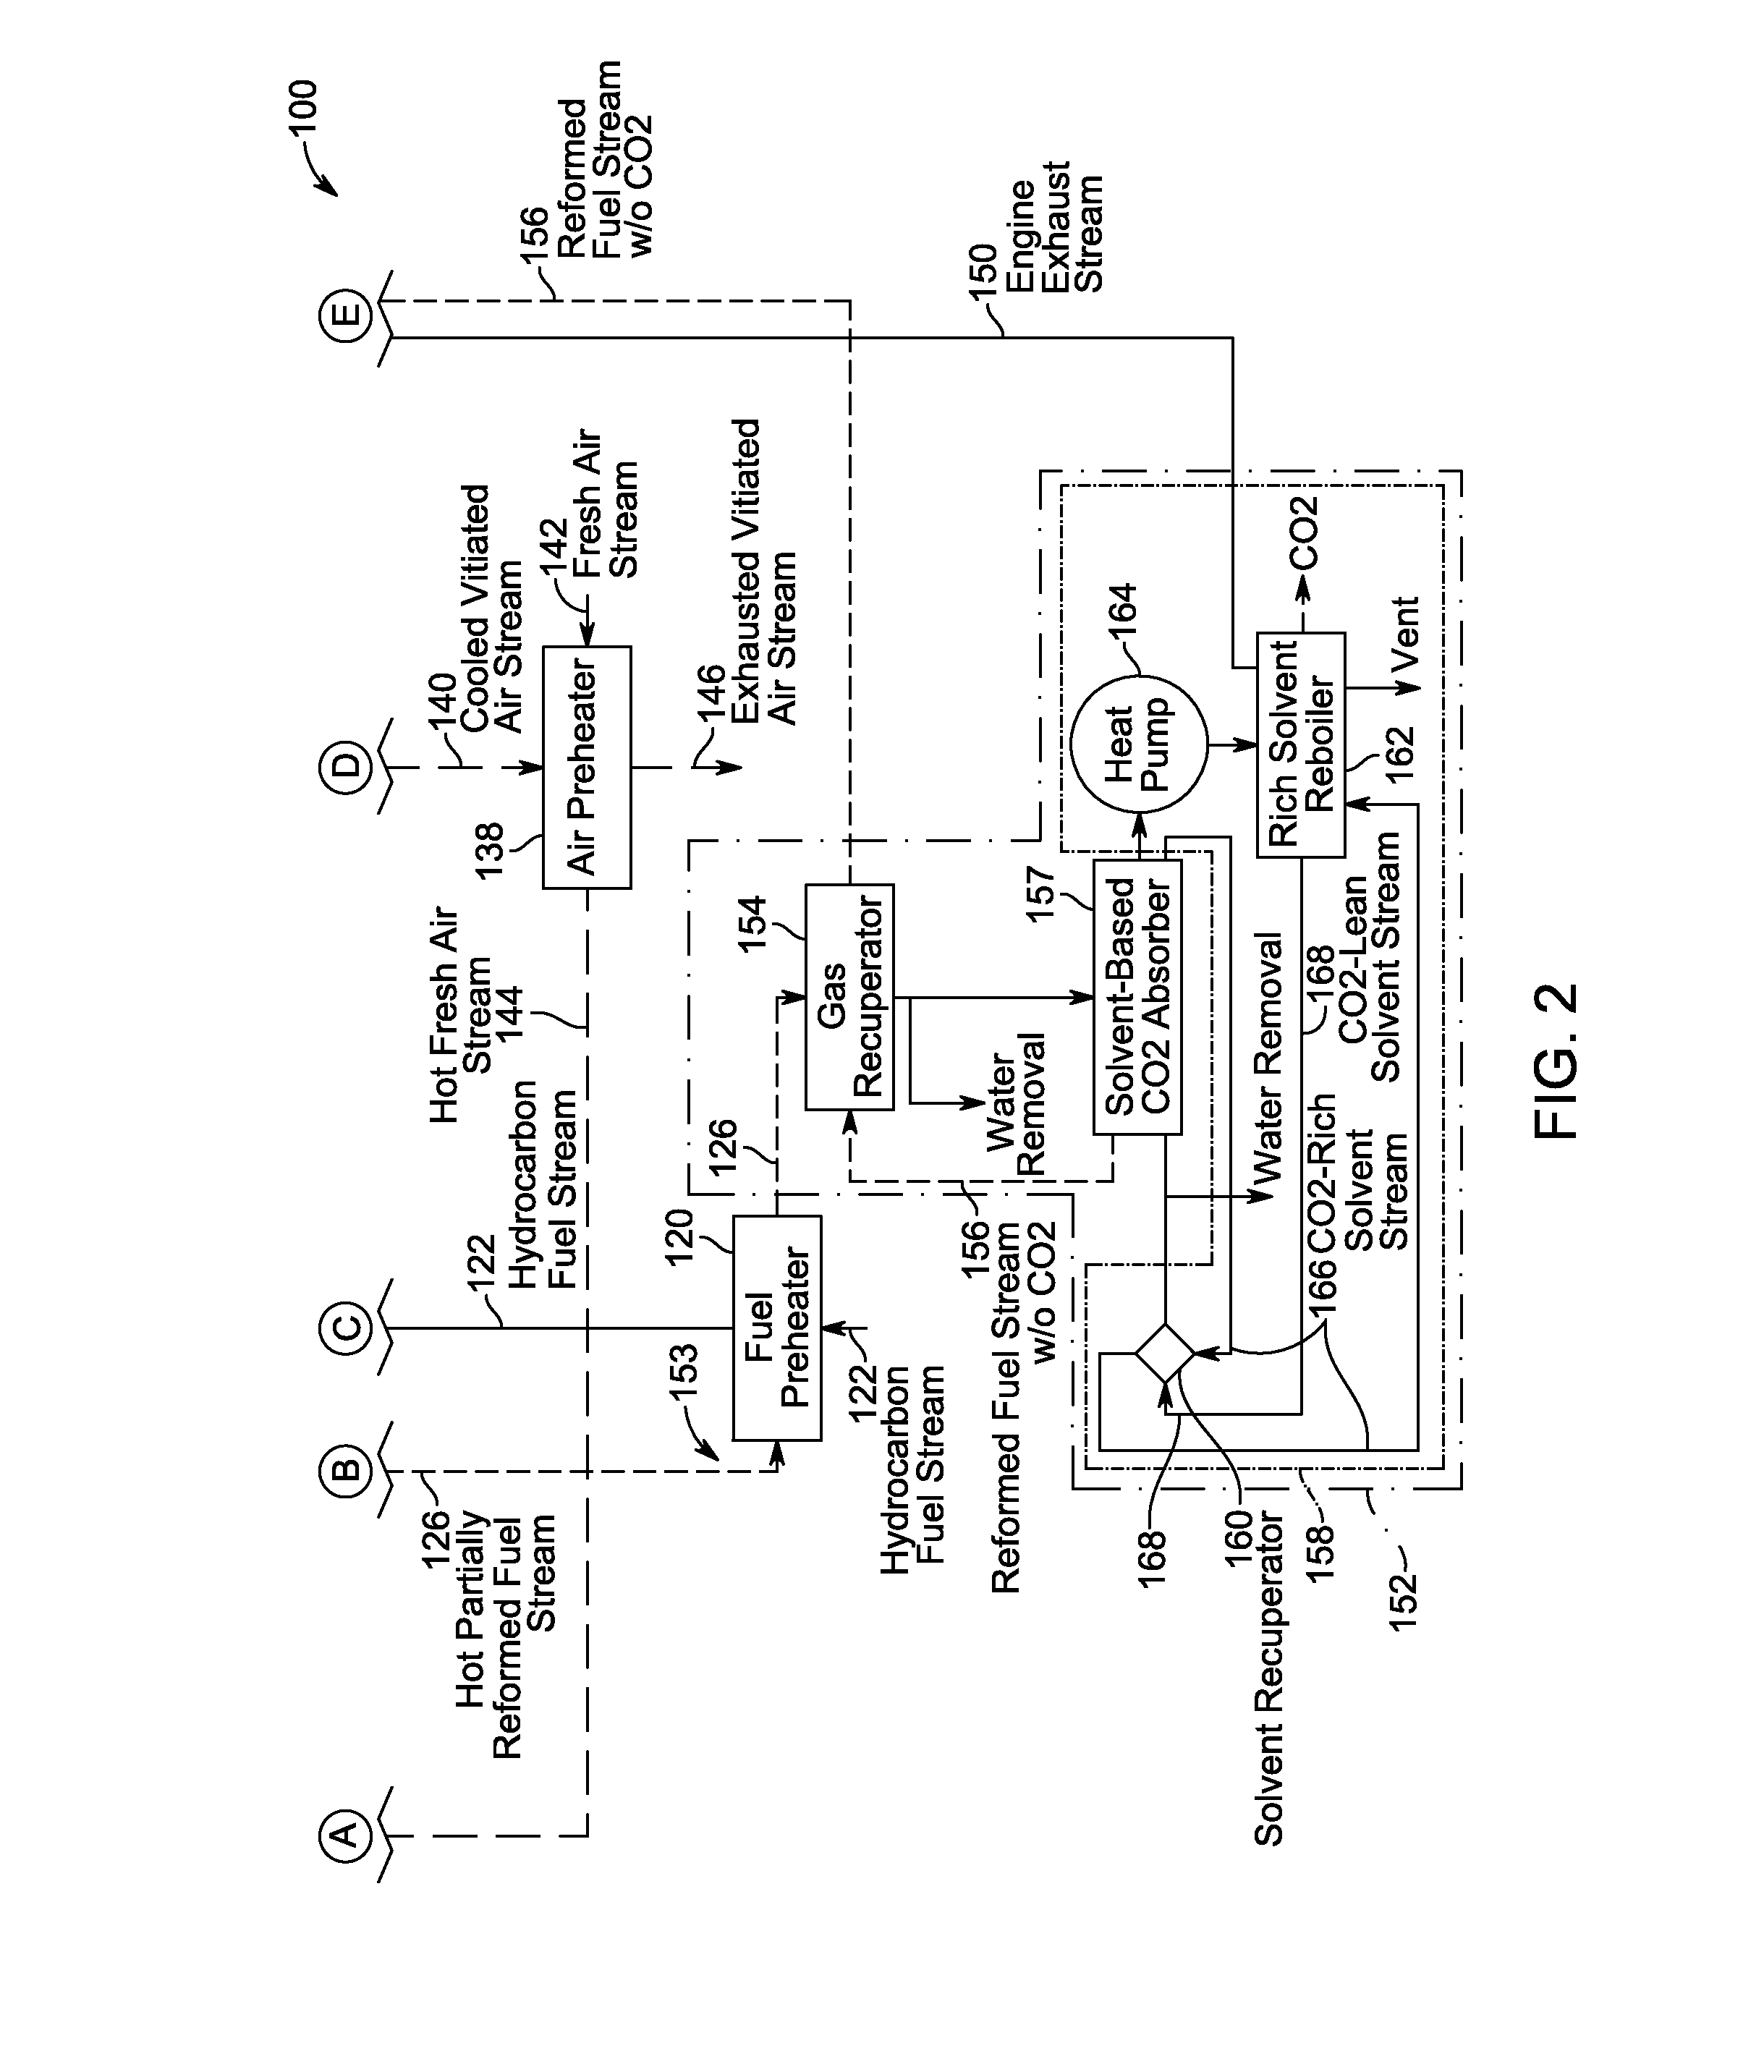 Fuel cell reforming system with carbon dioxide removal